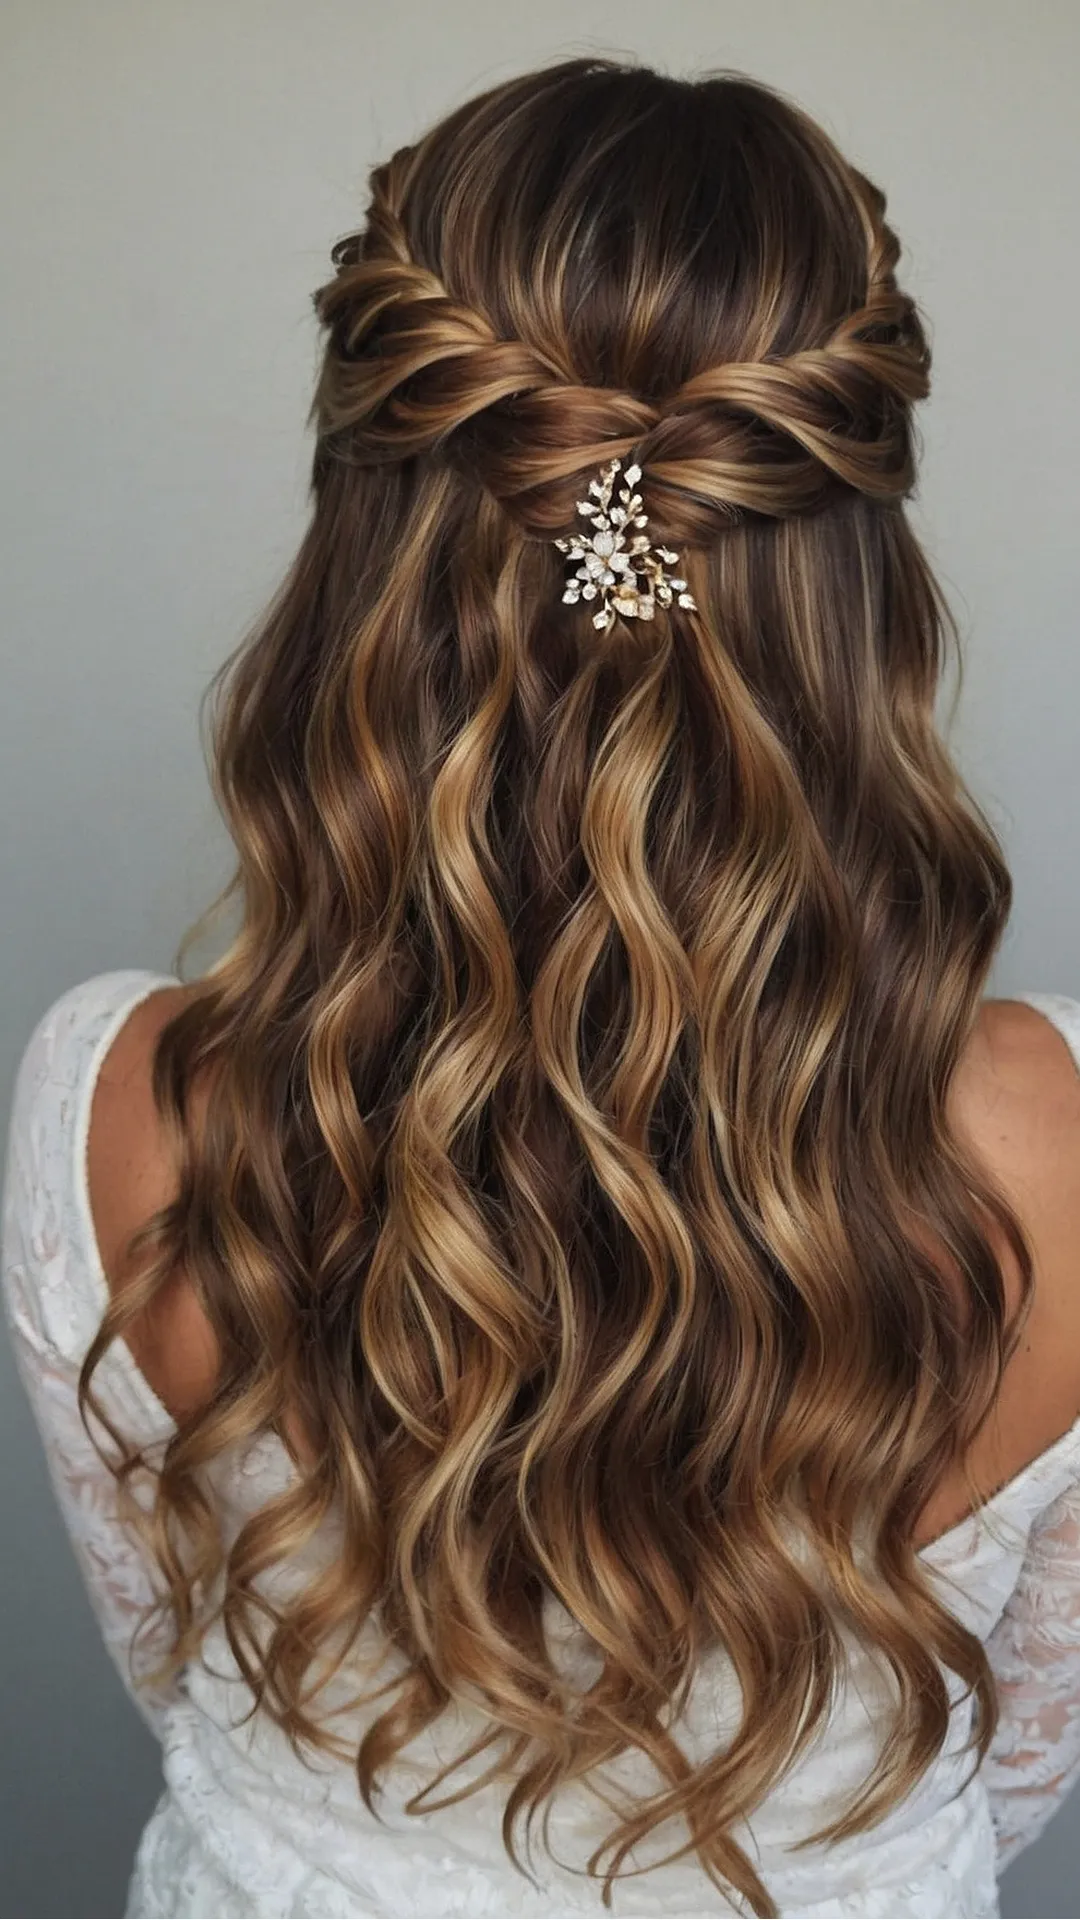 Sleek and Sophisticated: Modern Prom Hair Trends